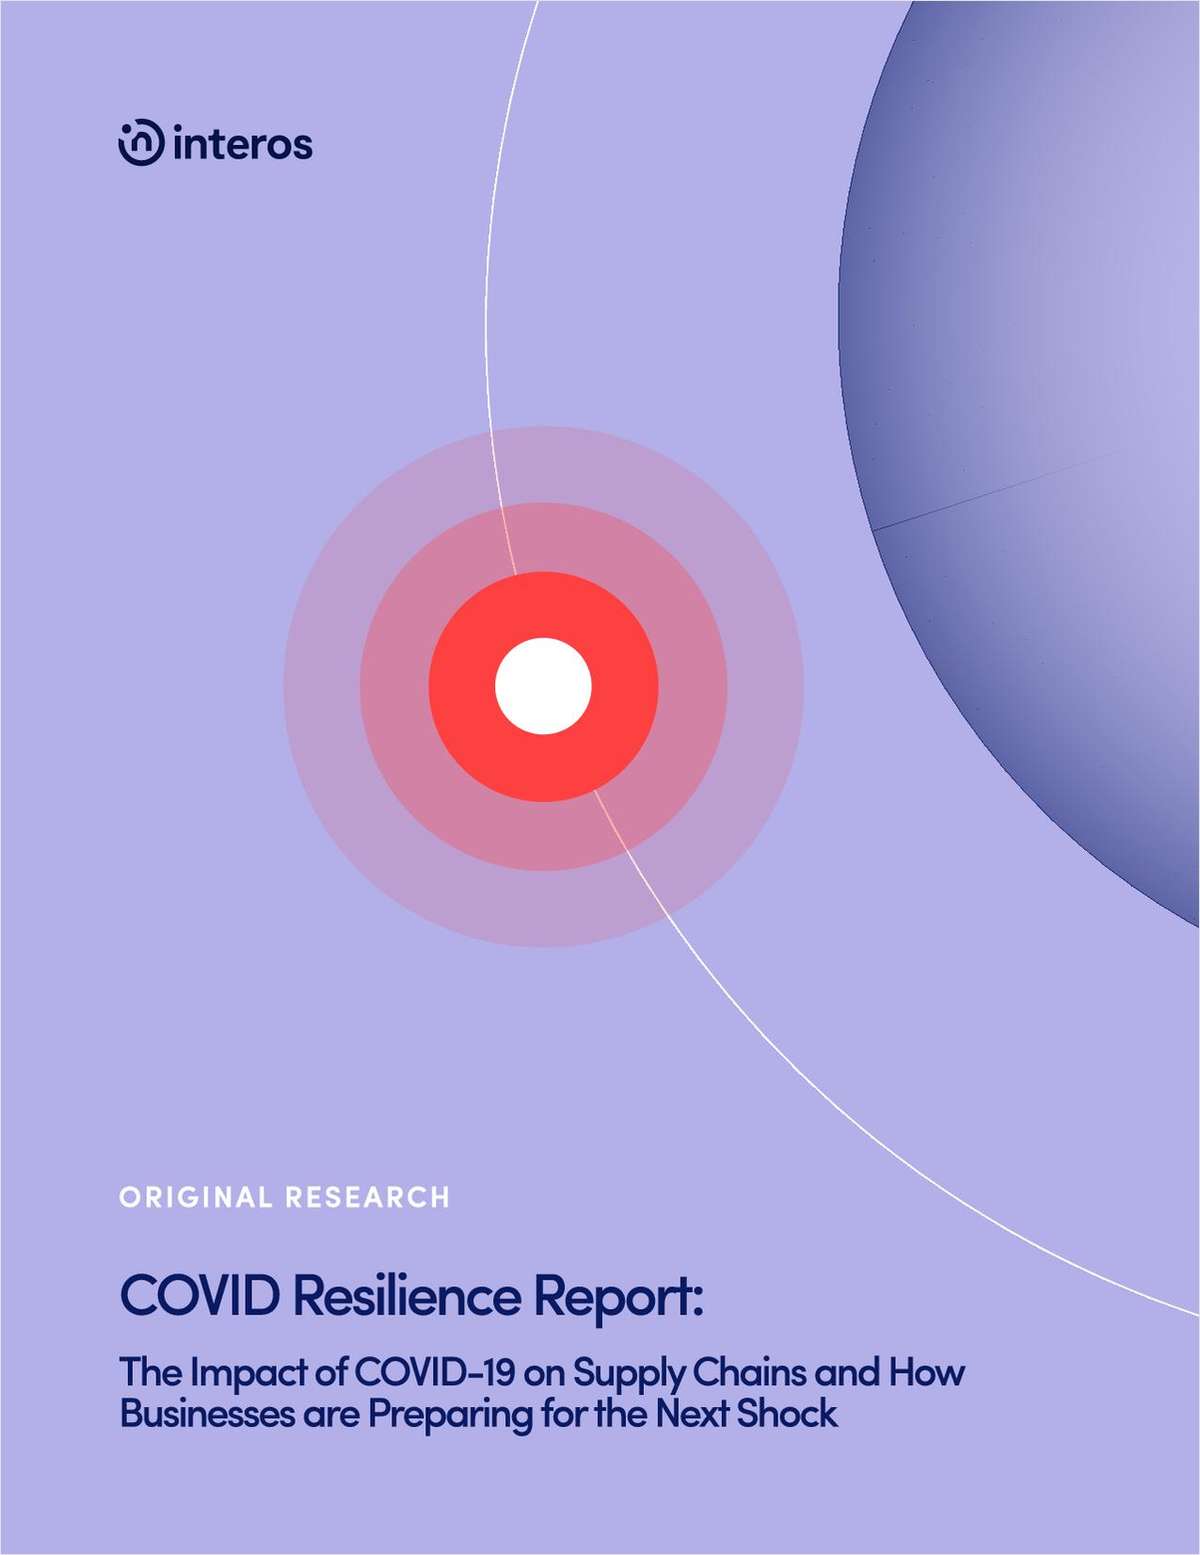 COVID Resilience Report: The Impact of COVID-19 on Supply Chains and How Businesses are Preparing for the Next Shock